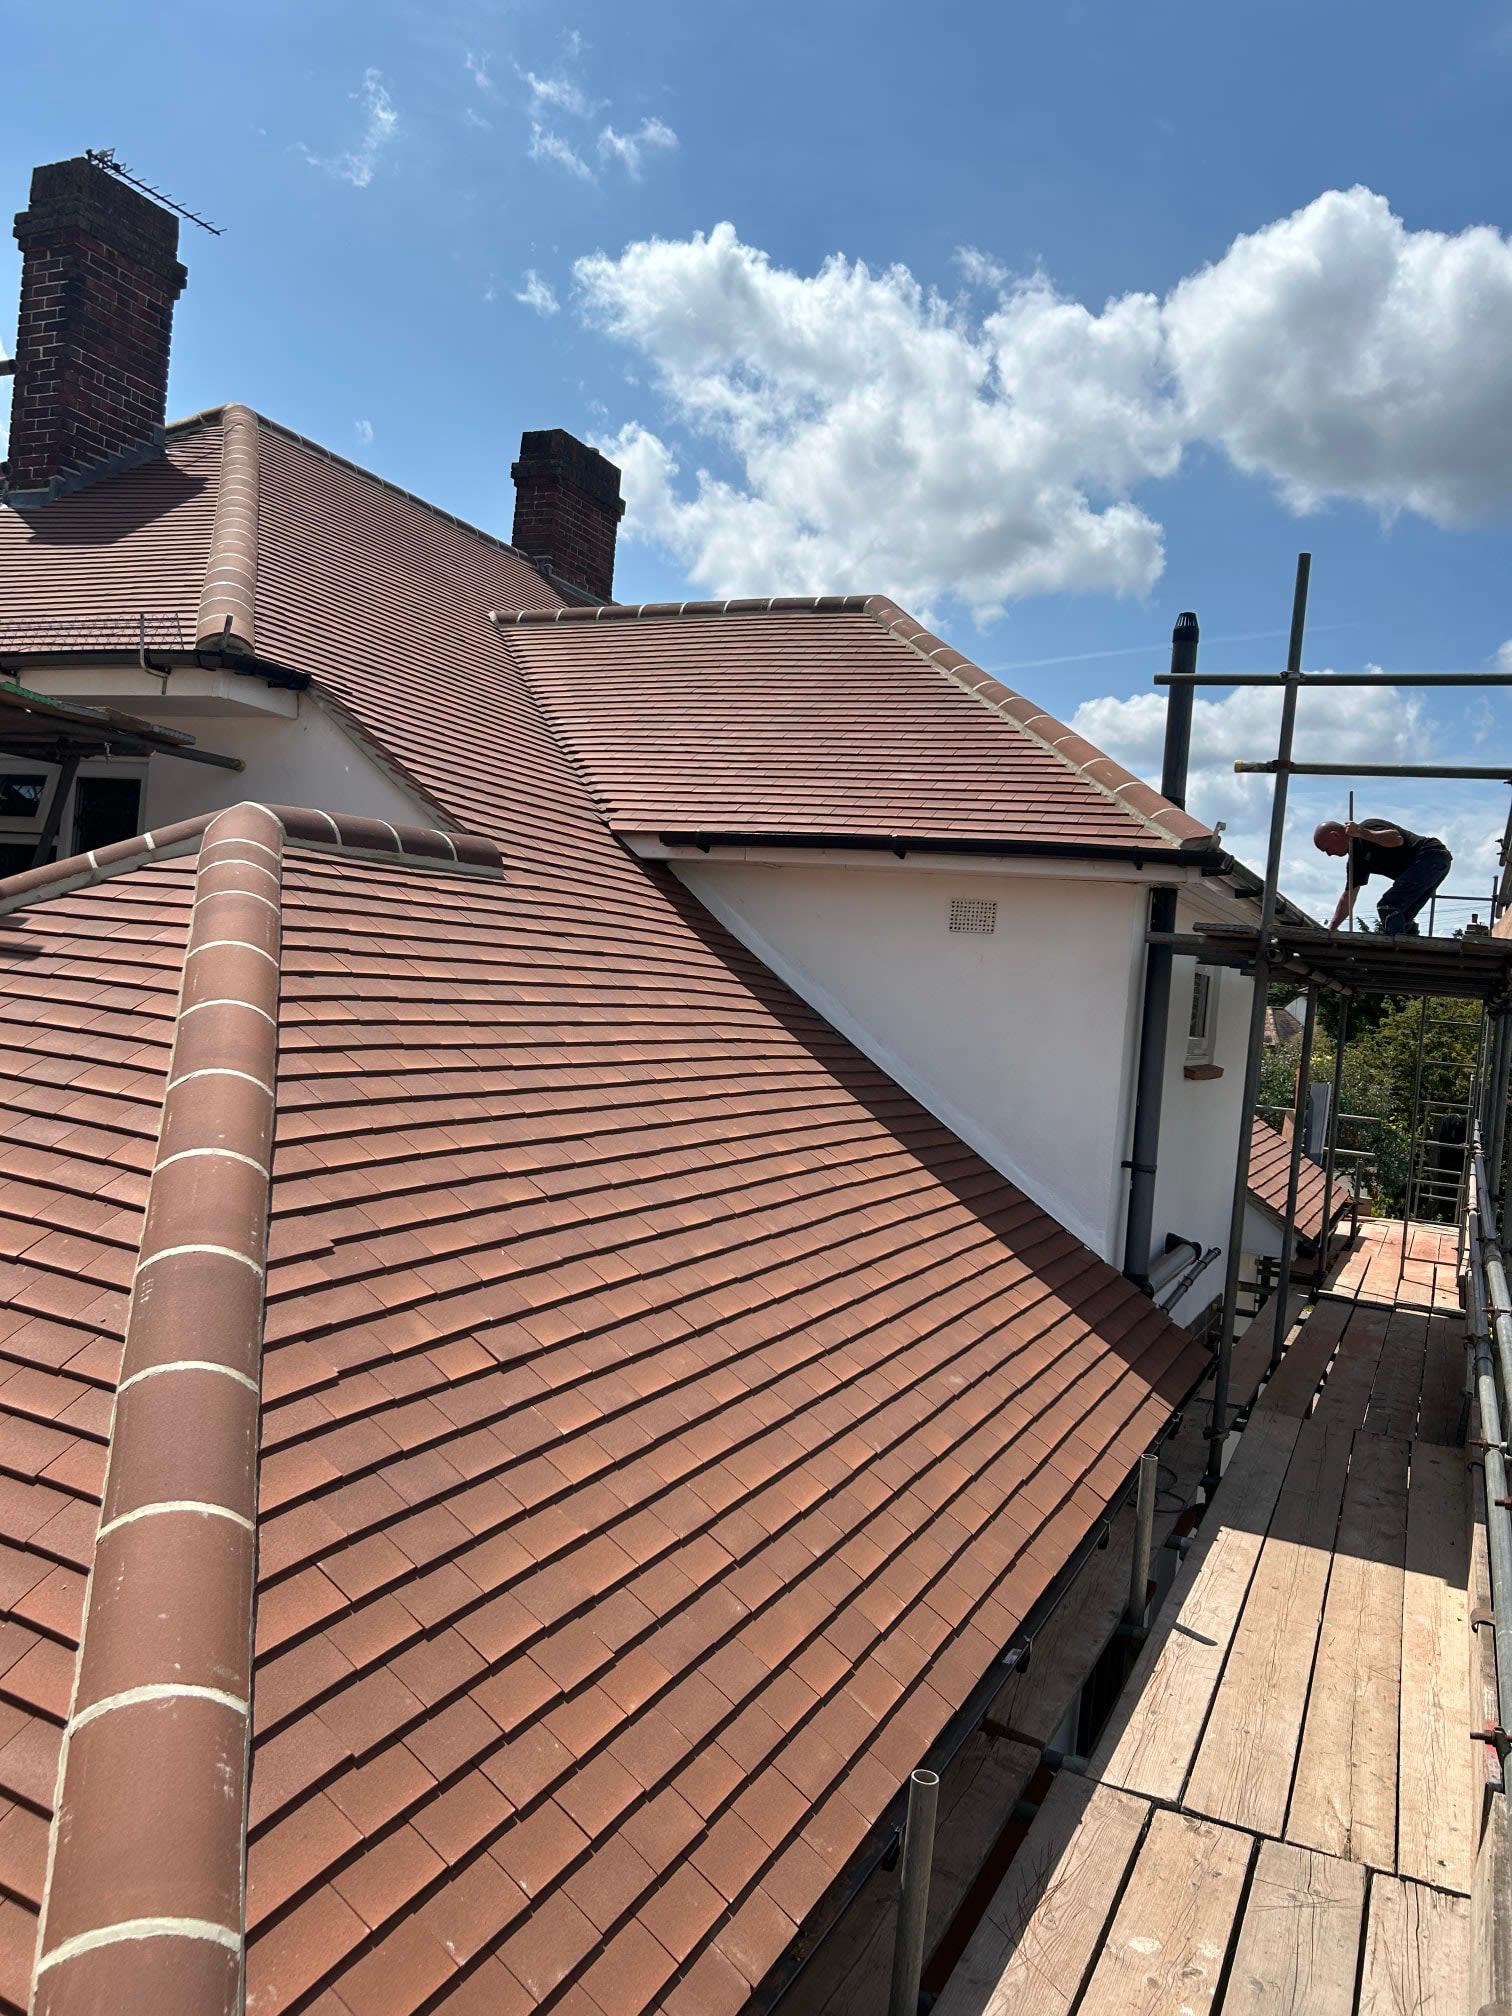 Images Sapsford Roofing Ltd